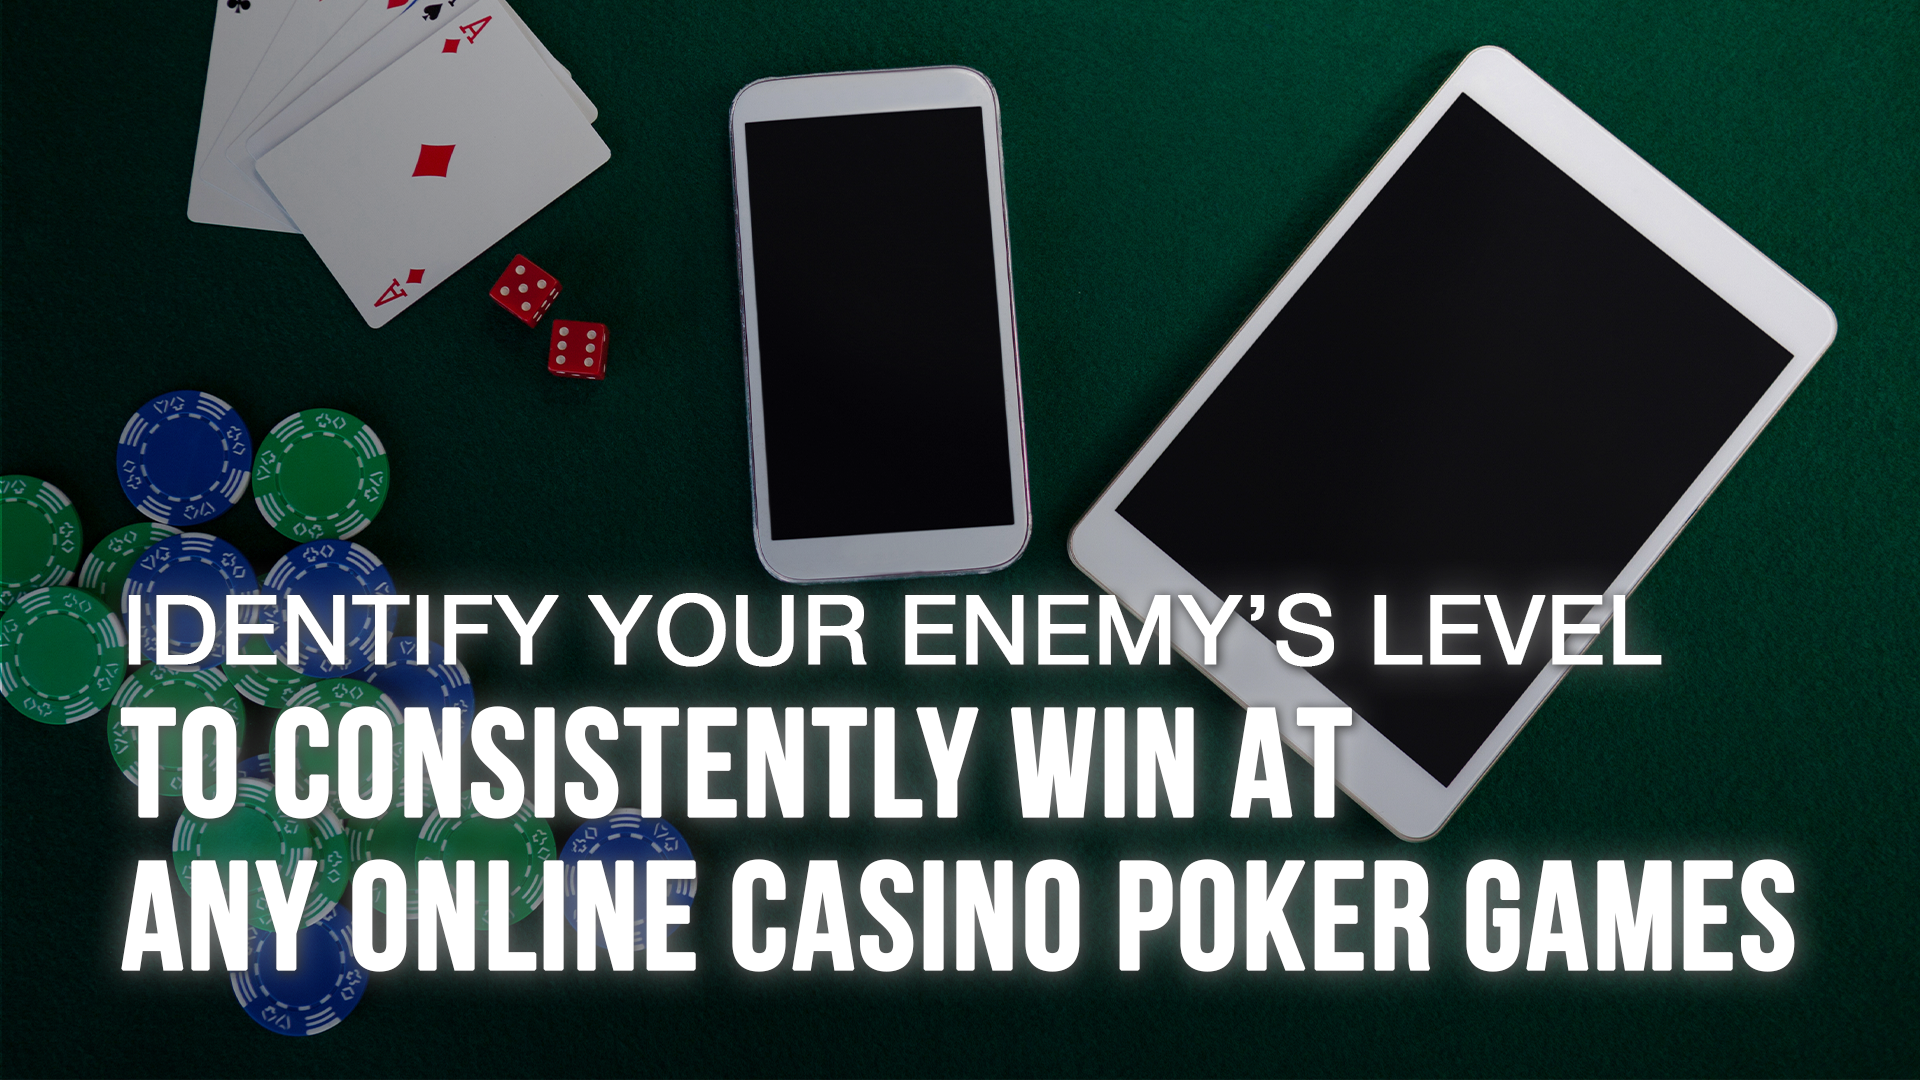 Know Thy Enemy at Any Online Casino Poker Games